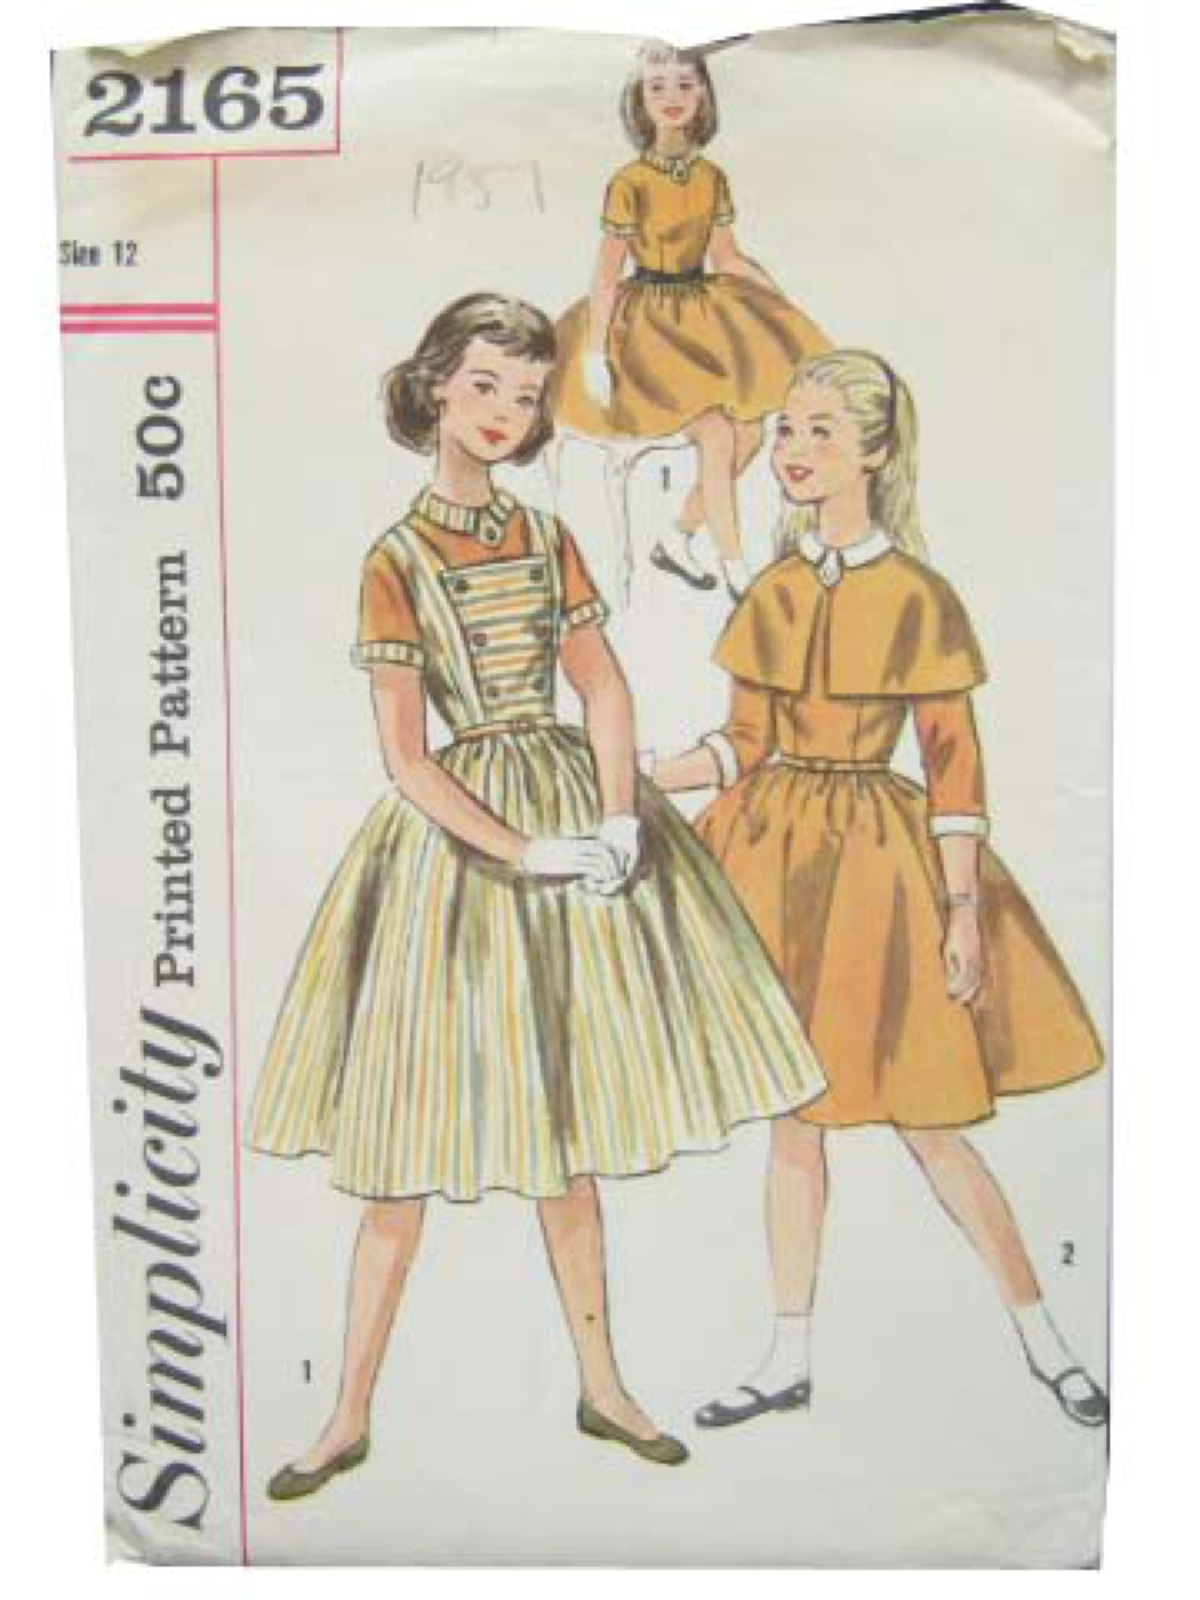 Vintage 1950's Sewing Pattern: 50s -Simplicity Pattern No. 2165